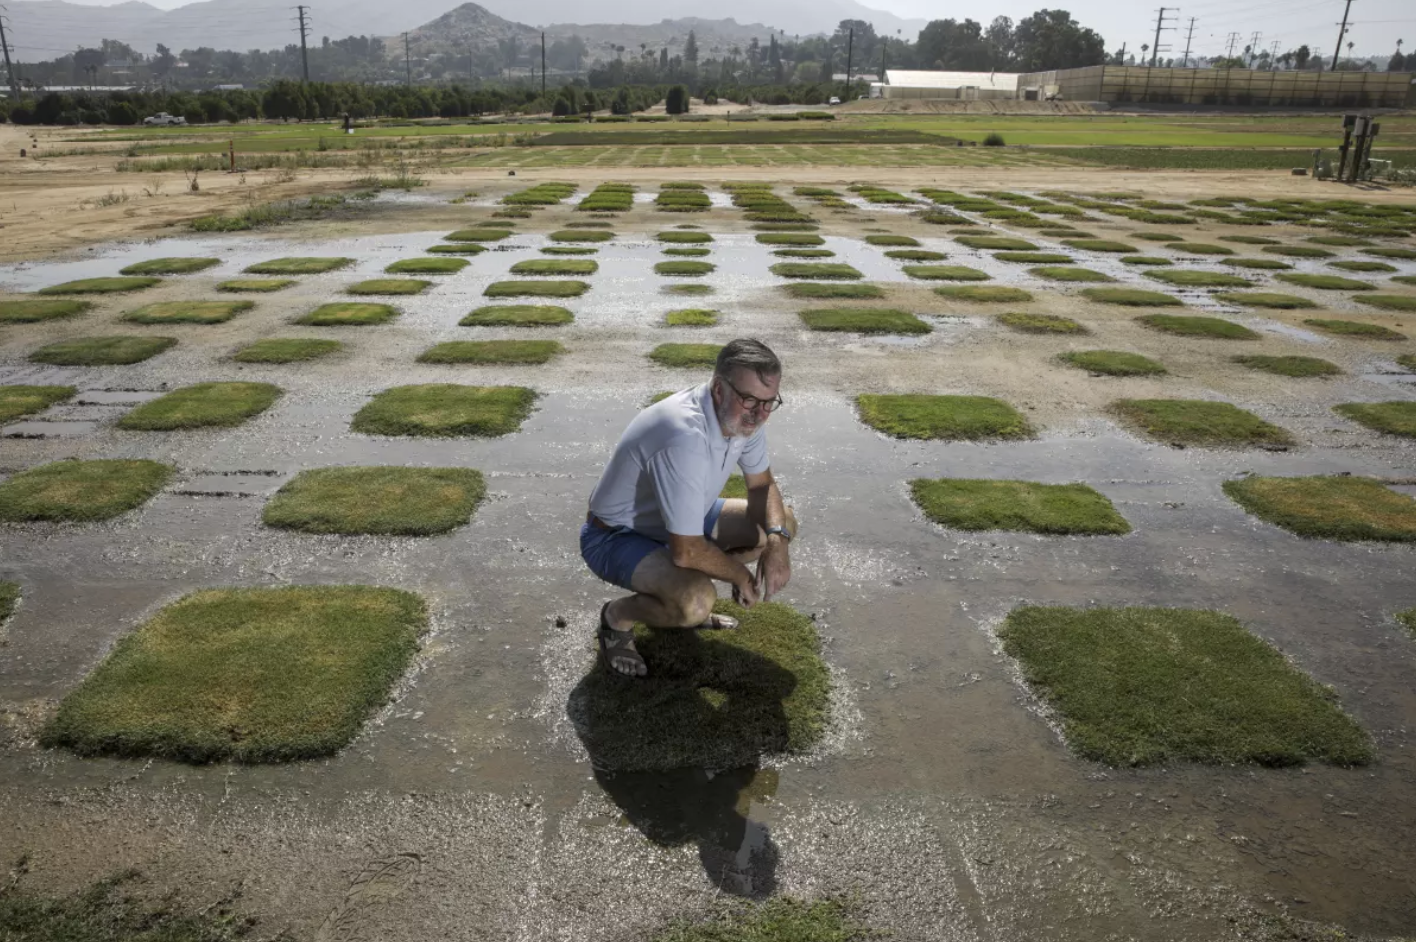 Drought-resistant turf patents